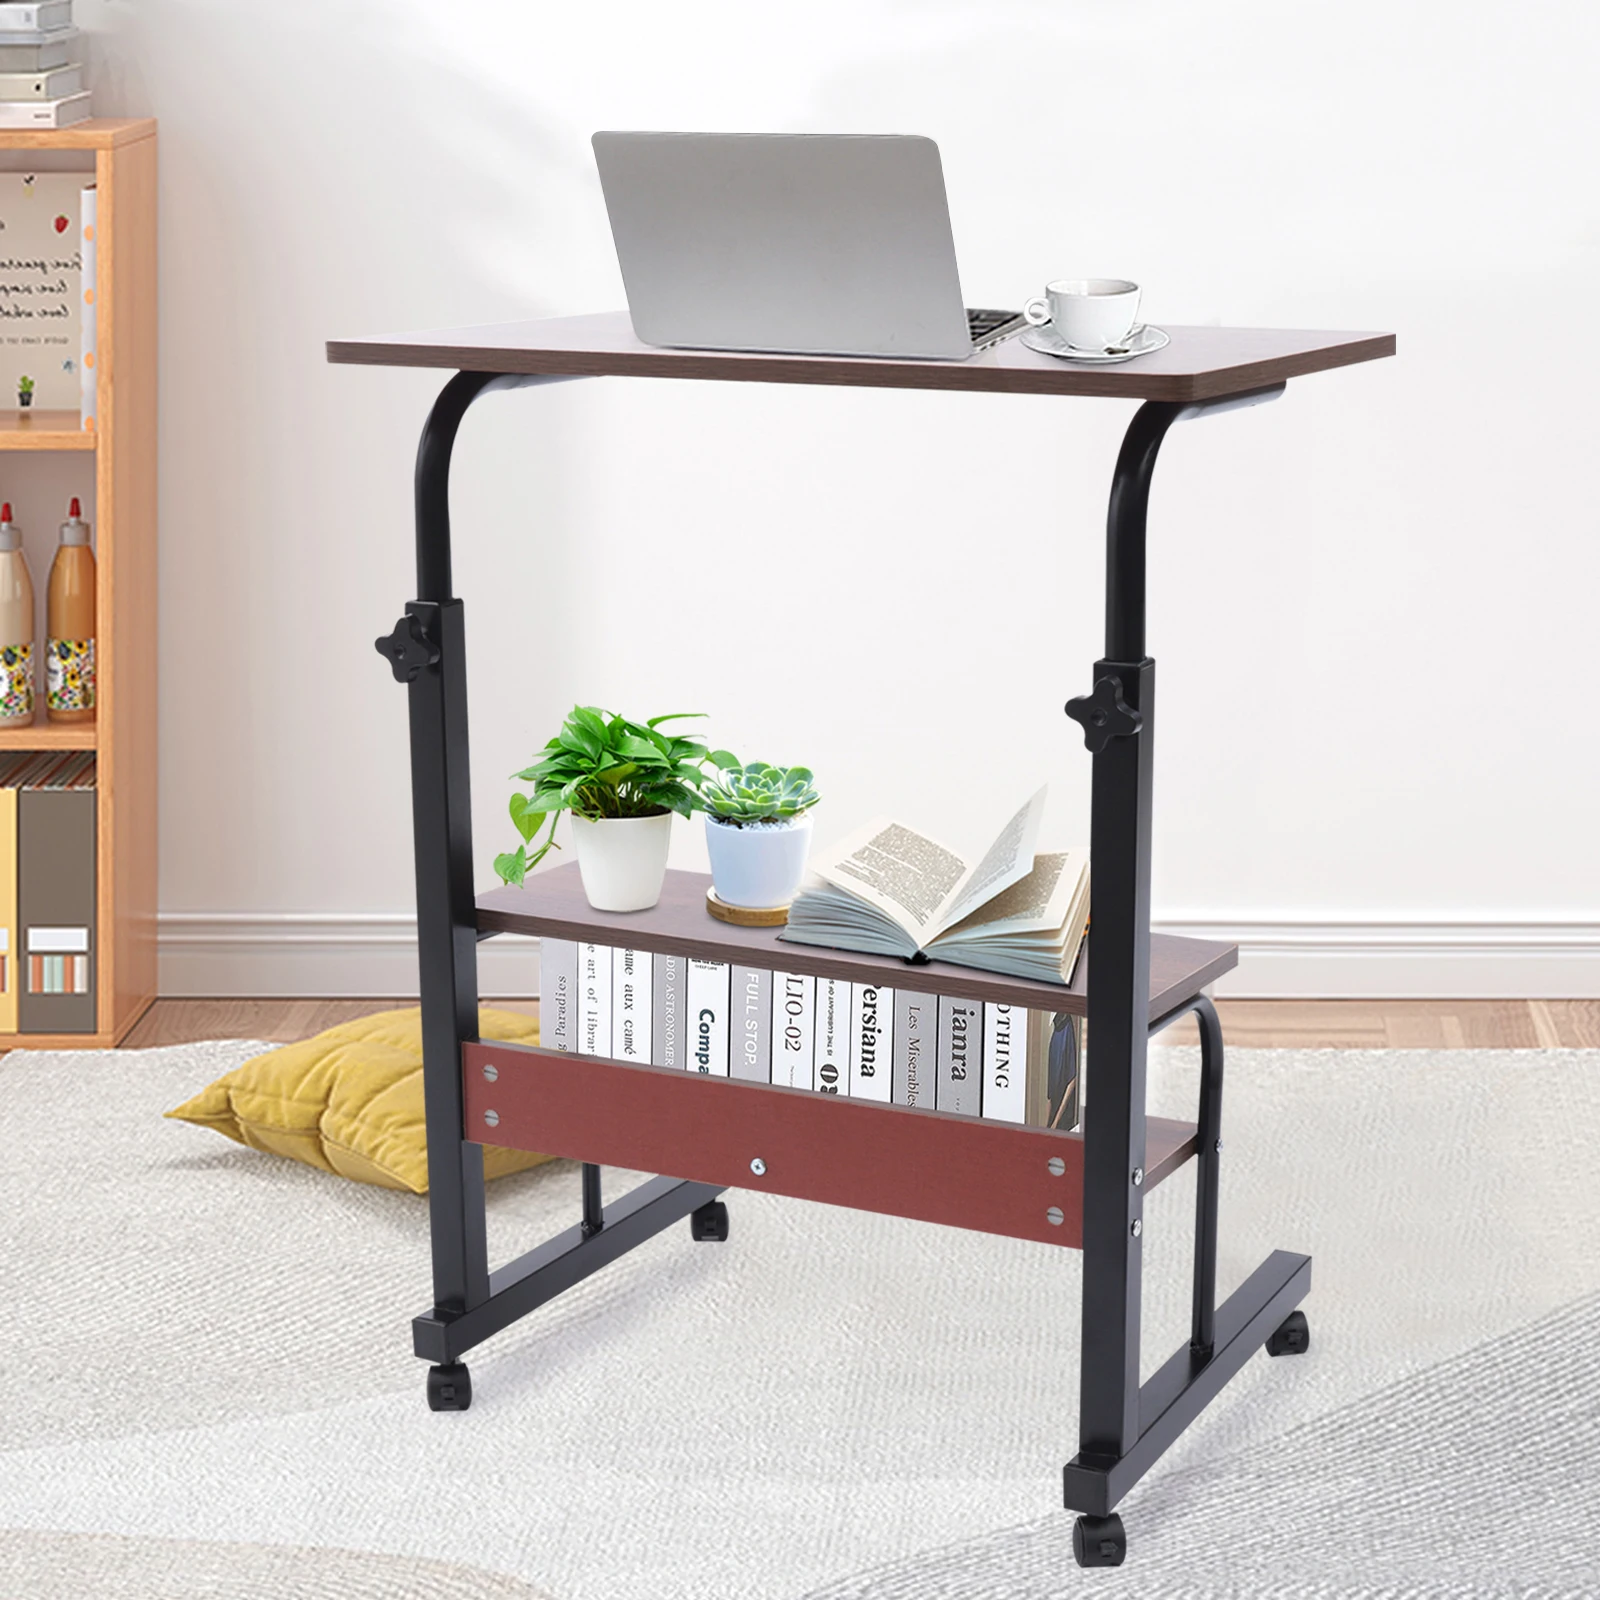 rolling-side-table-adjustable-height-mobile-laptop-side-table-with-double-storage-rack